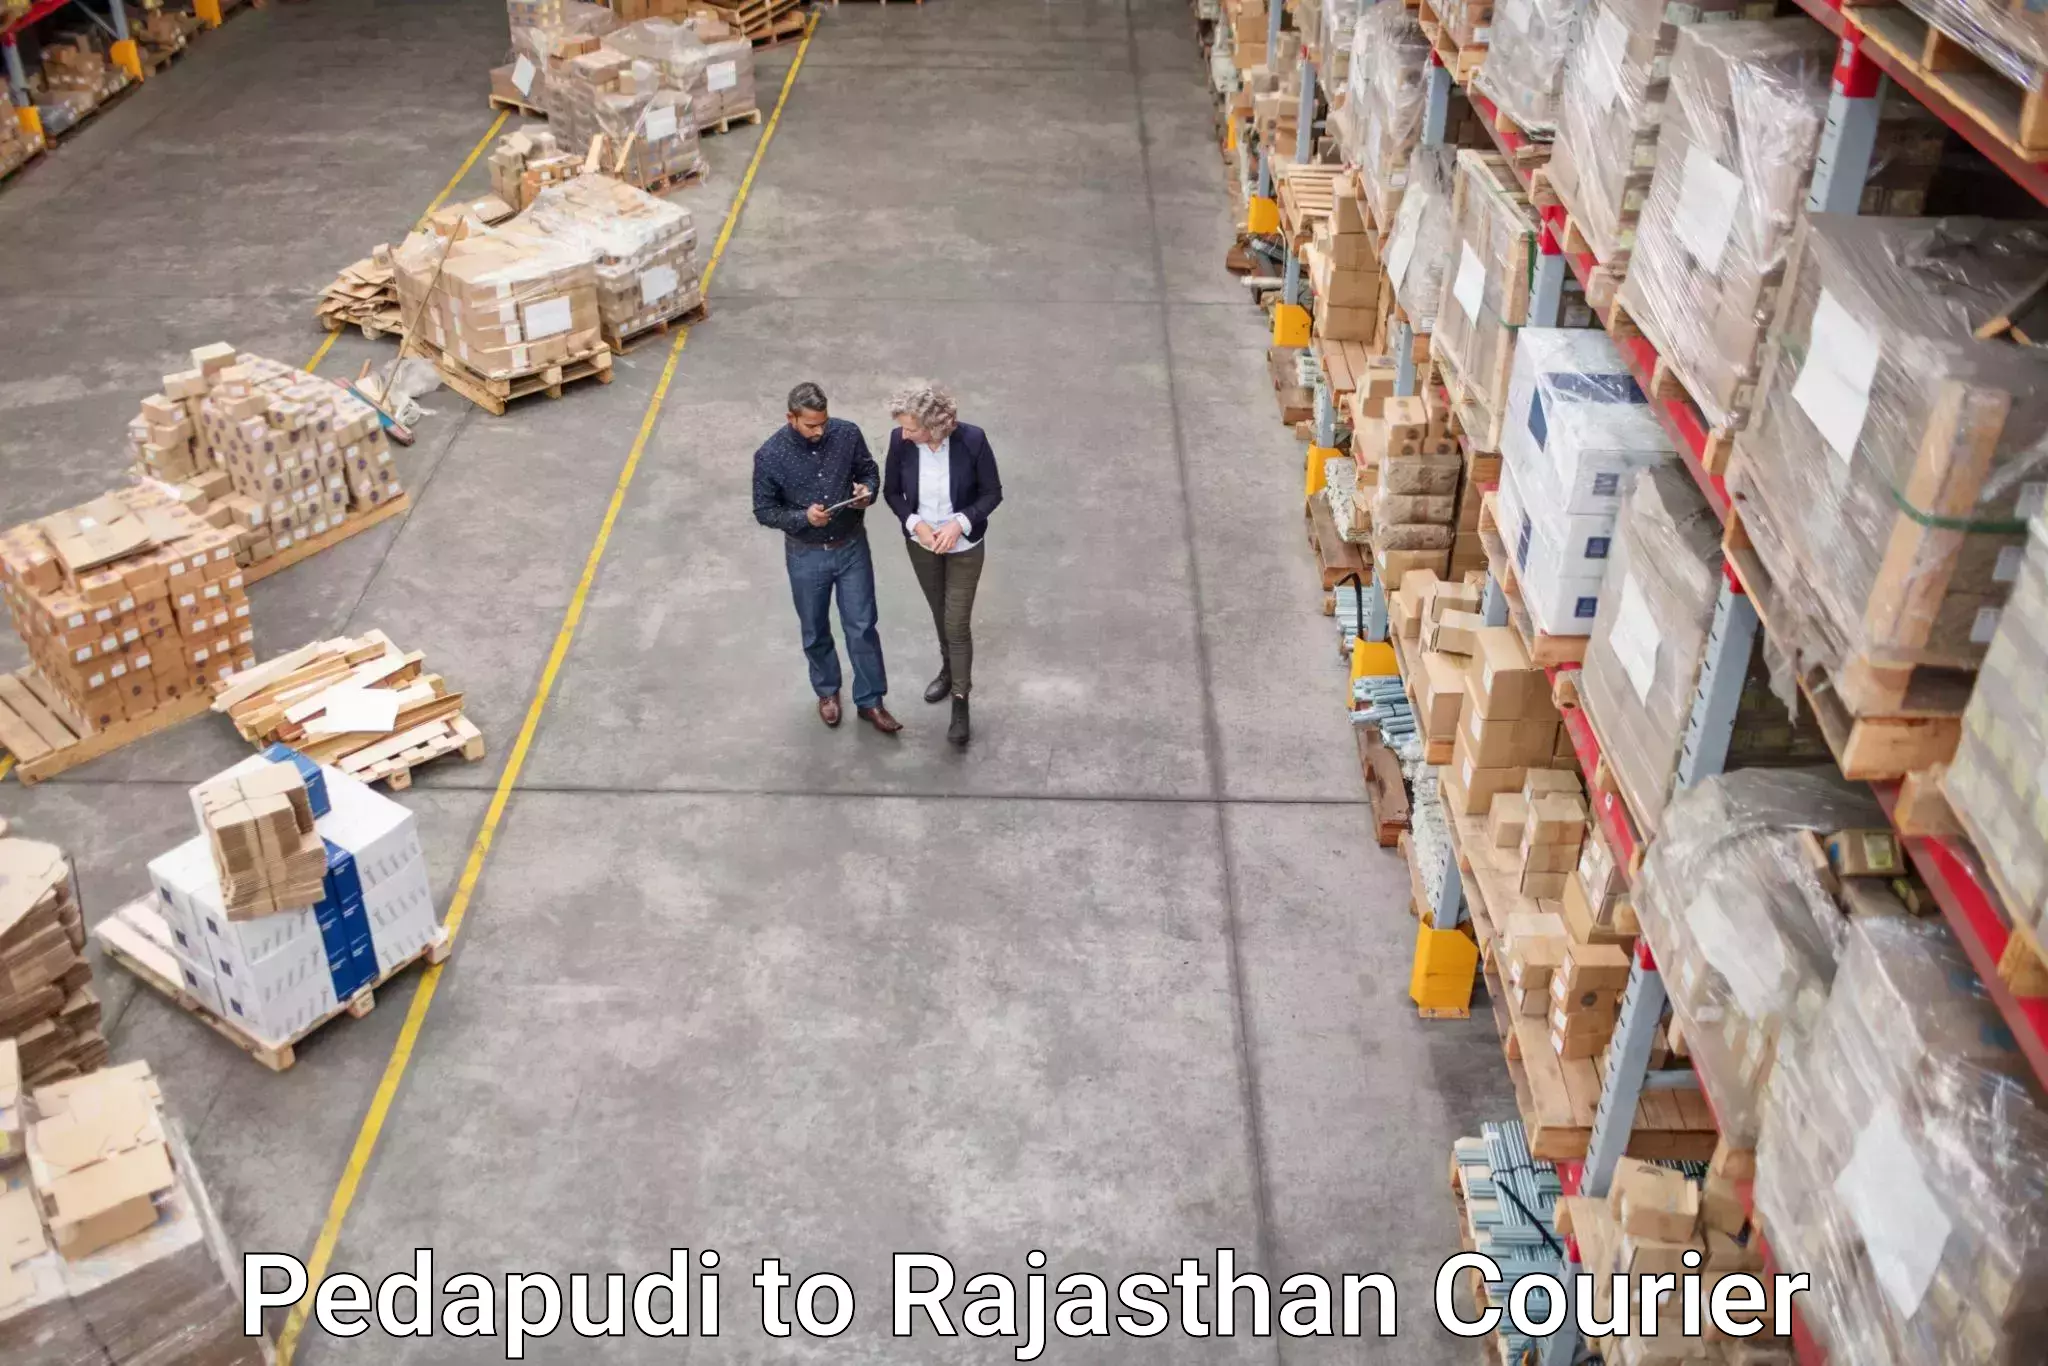 Express delivery network Pedapudi to Rajgarh Rajasthan